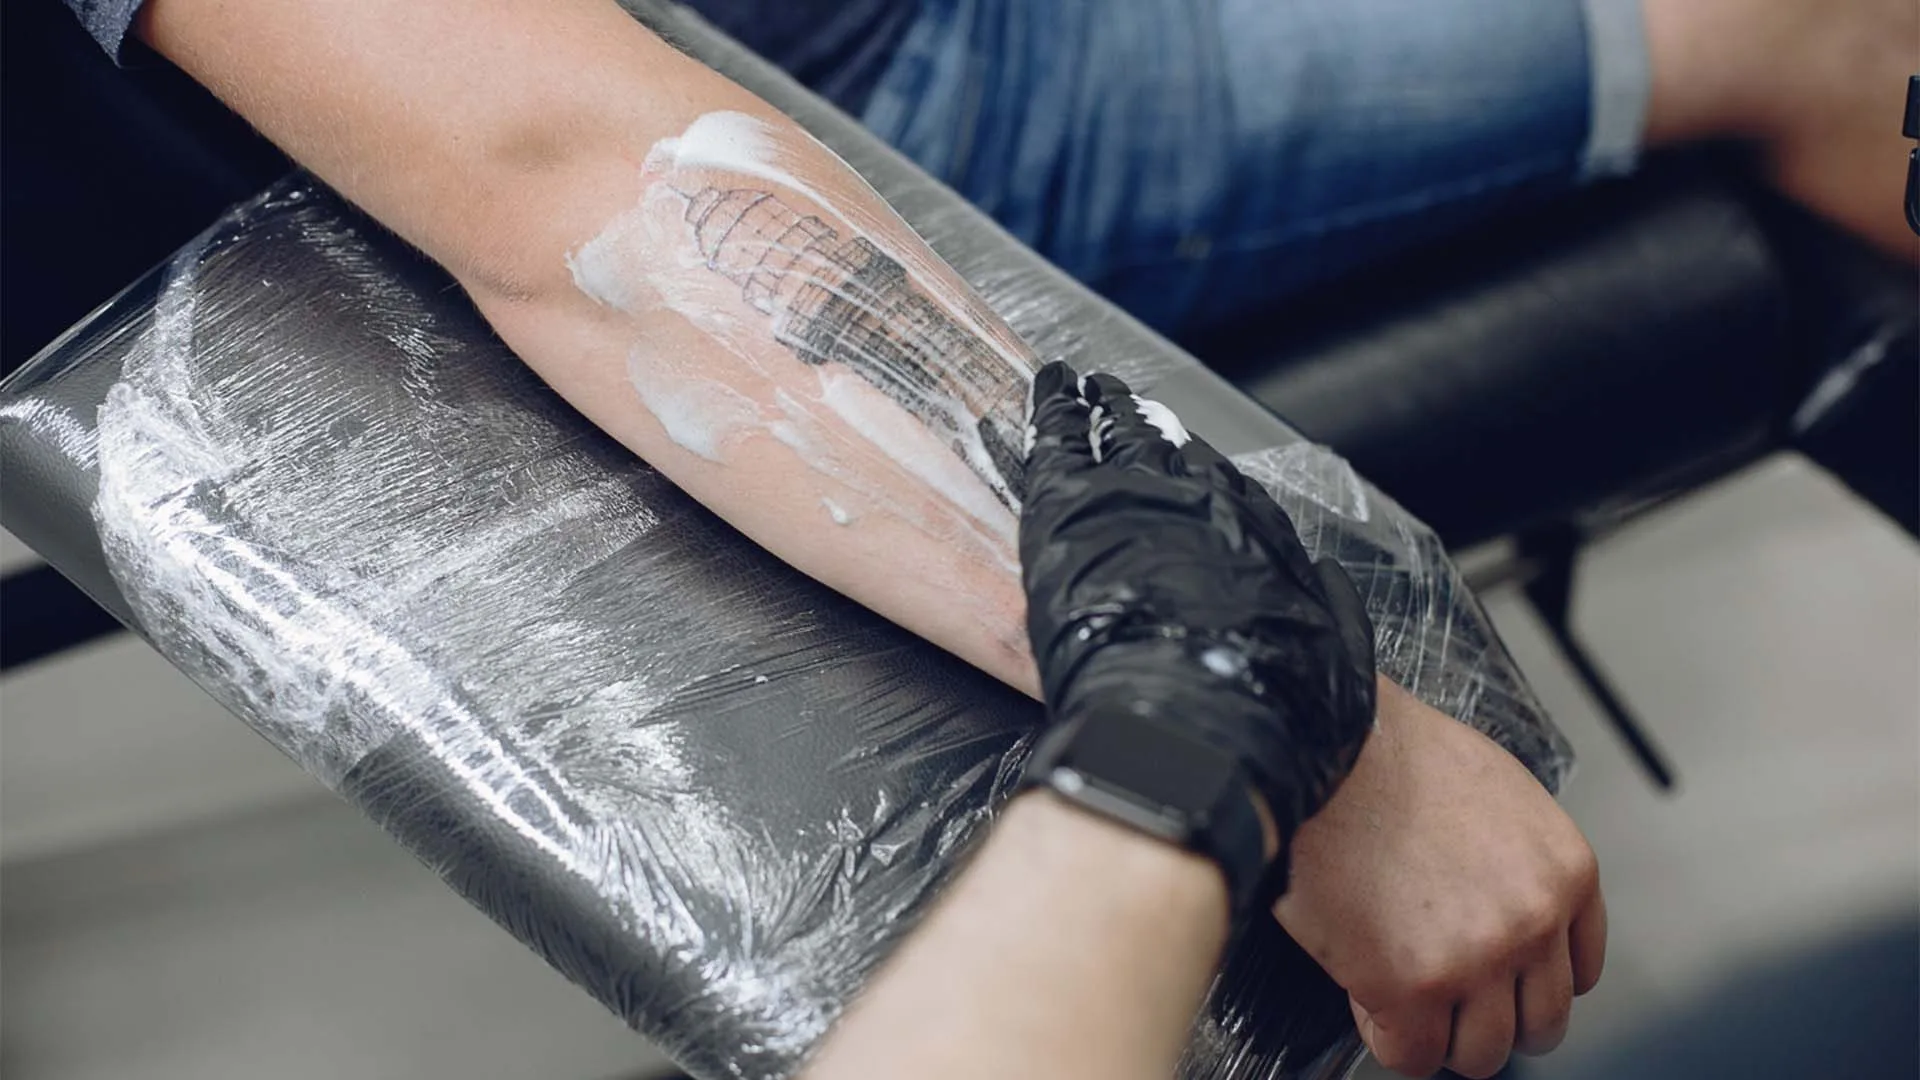 Keep your tattoo clean and moisturized